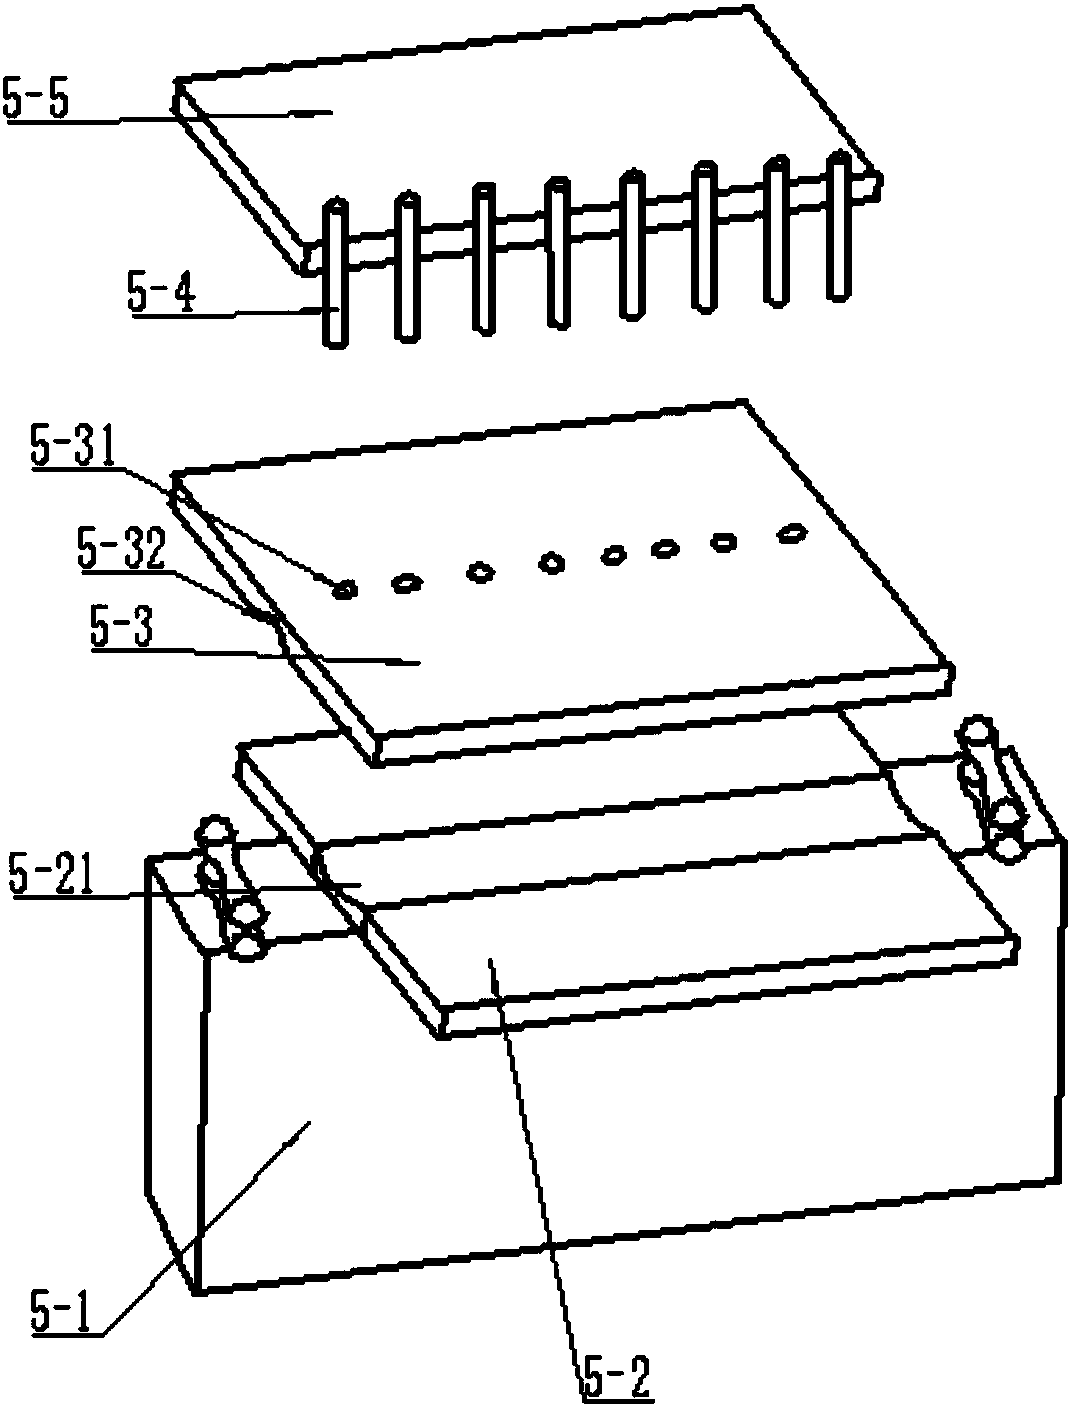 Perforating method for perforating one row of holes in hose